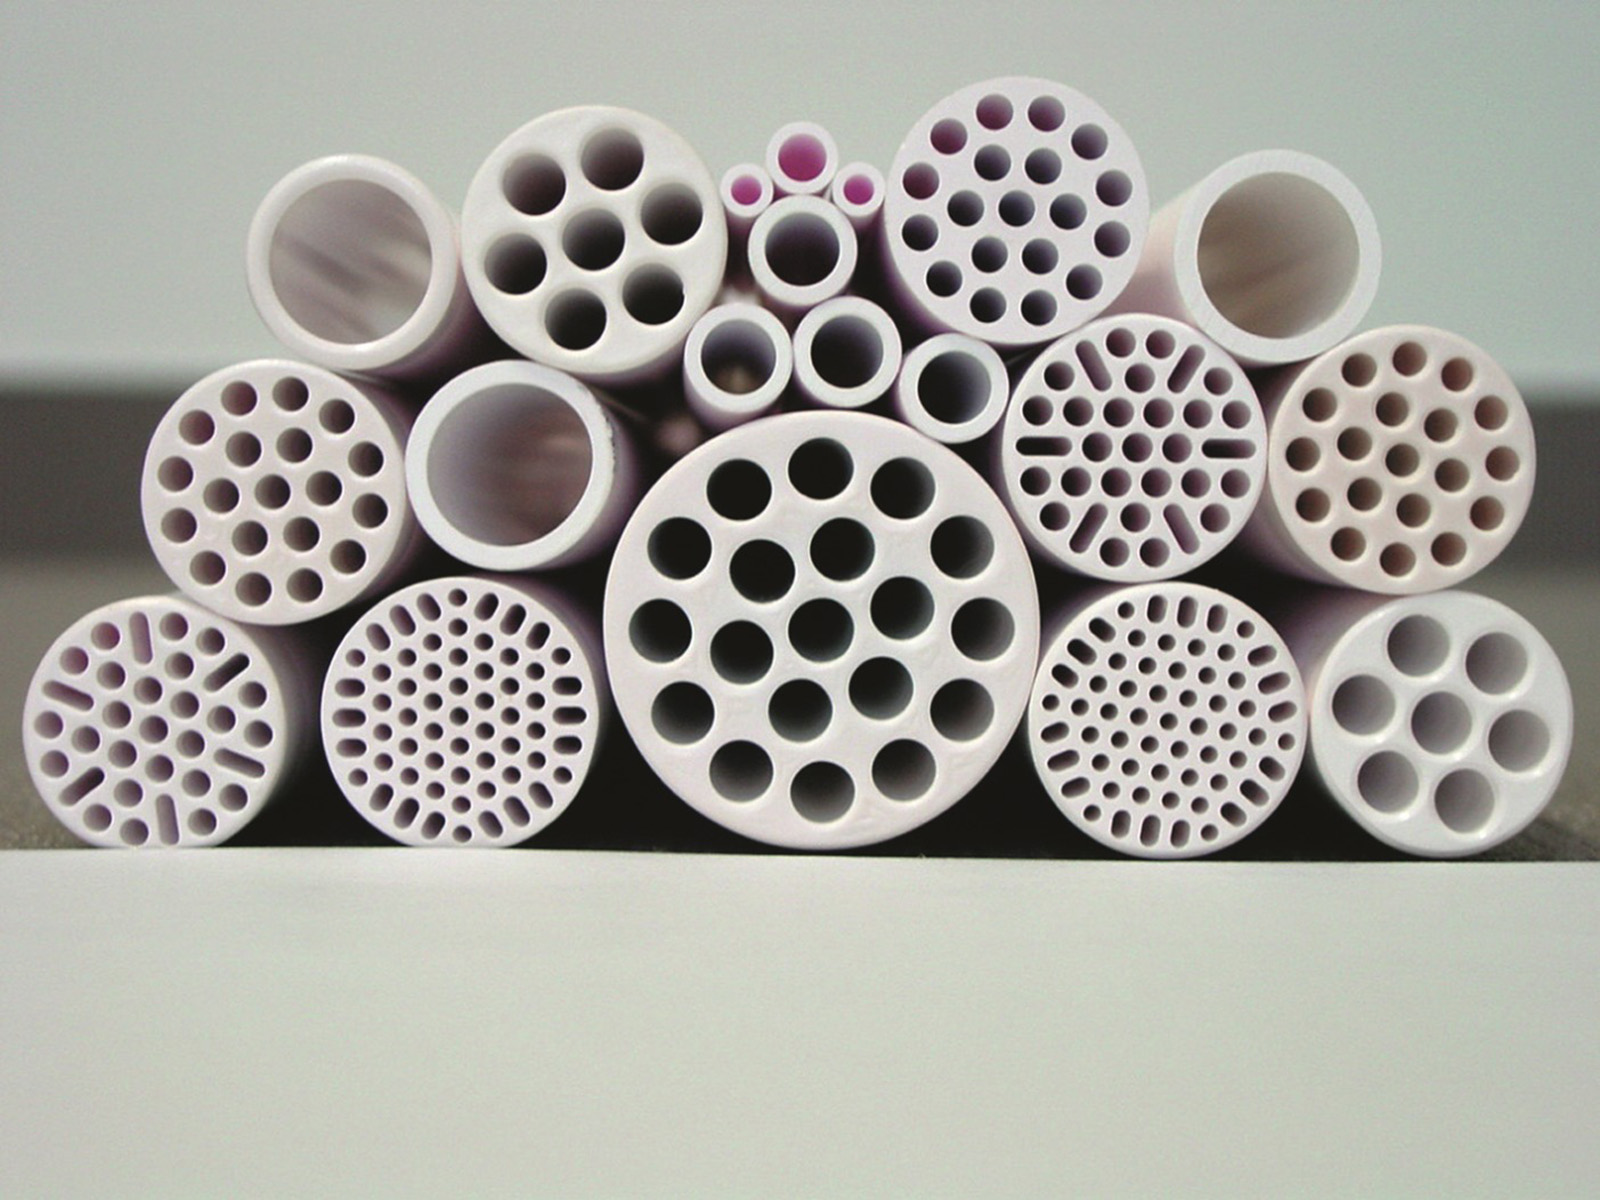 Ceramic membranes by the Fraunhofer Institute for Ceramic Technologies and Systems IKTS.